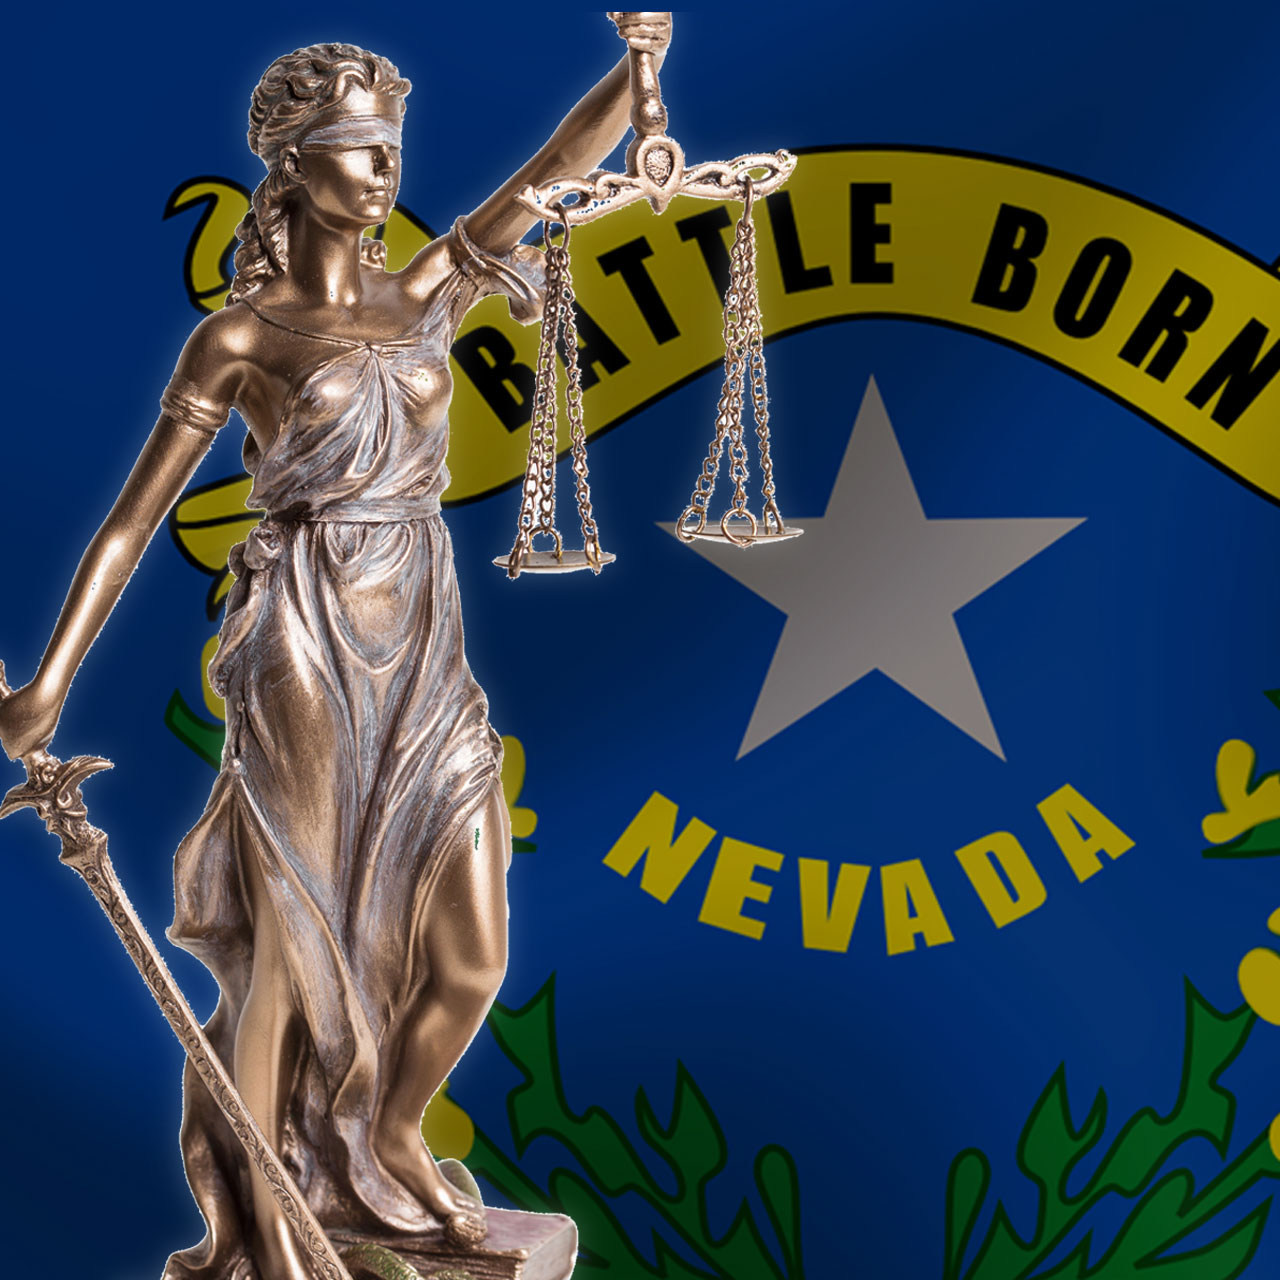 Image of Themis (lady justice) over Nevada State flag